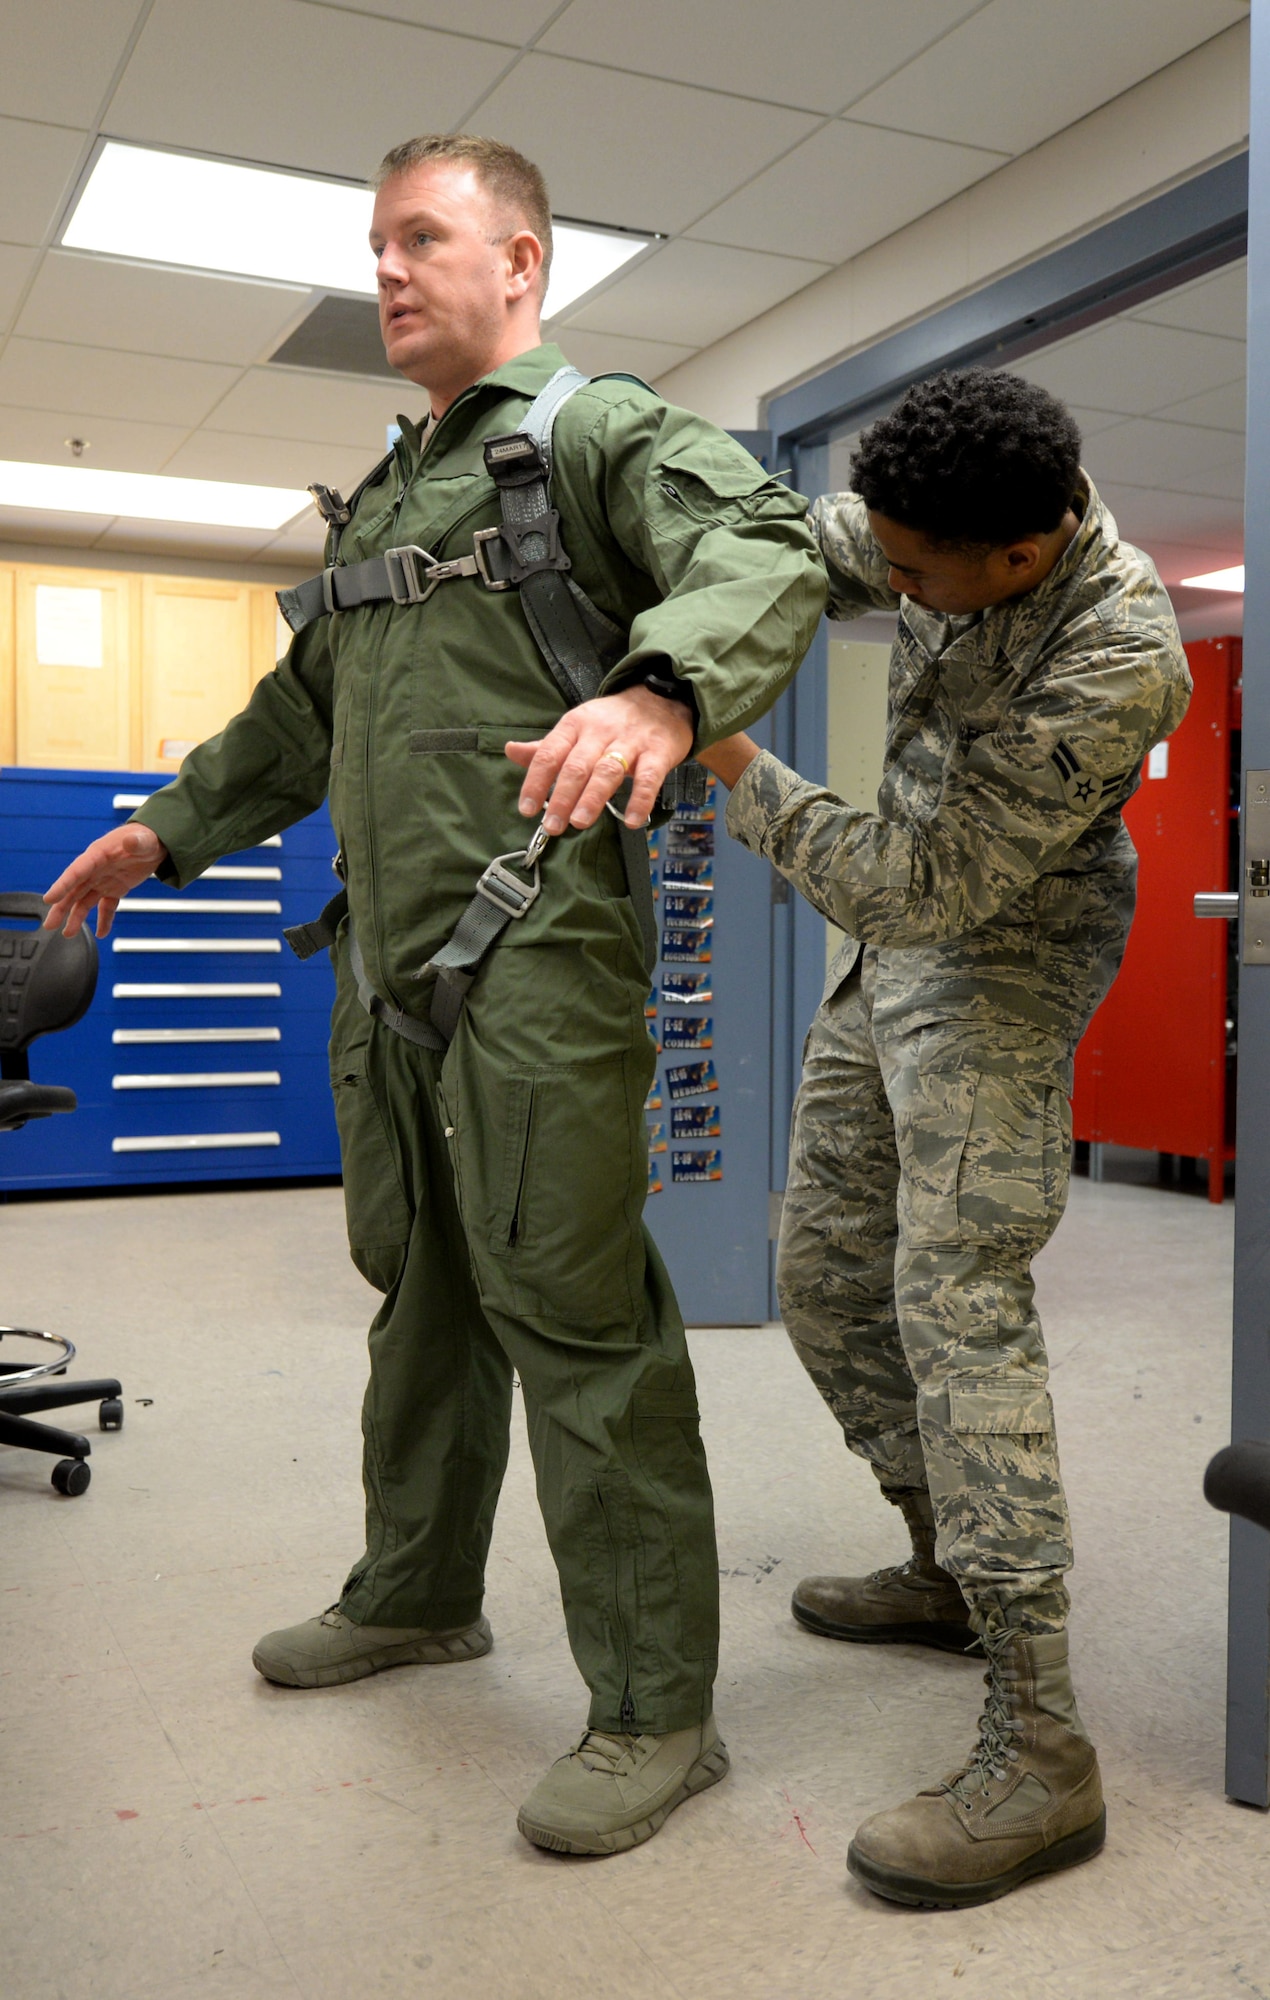 Airman 1st Class Trevor Garrett, a 28th Operations Support Squadron aircrew flight equipment technician, right, fits a flight suit for Chief Master Sgt. Adam Vizi, the 28th Bomb Wing command chief, at Ellsworth Air Force Base, S.D., March 14, 2017. AFE technicians are tasked with performing thorough inspections on equipment such as aircrew helmets, oxygen masks and harnesses, as well as making any necessary repairs. (U.S. Air Force photo by Senior Airman Denise Jenson)